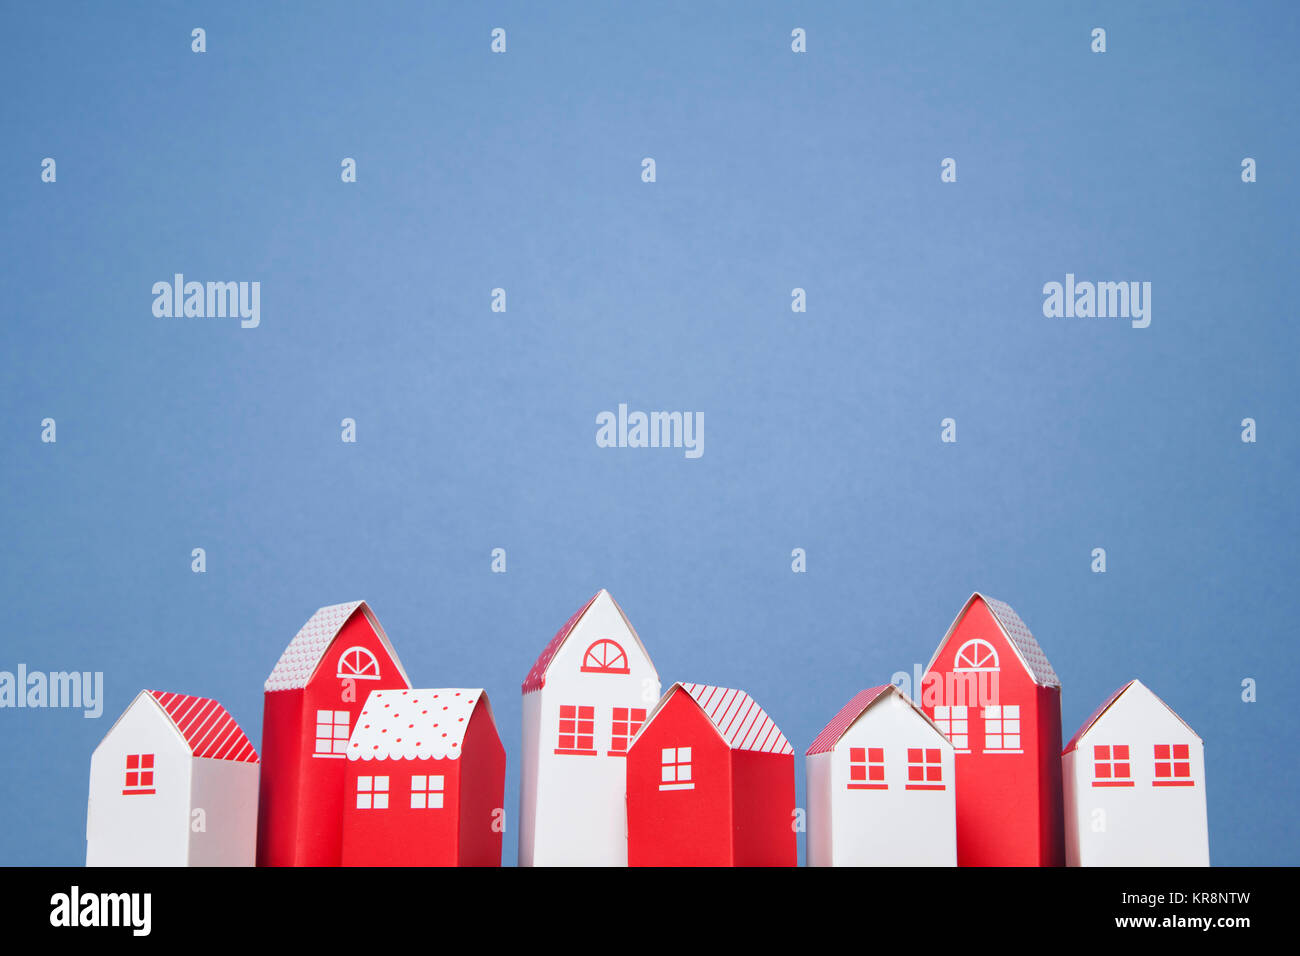 Row of paper toy houses Stock Photo